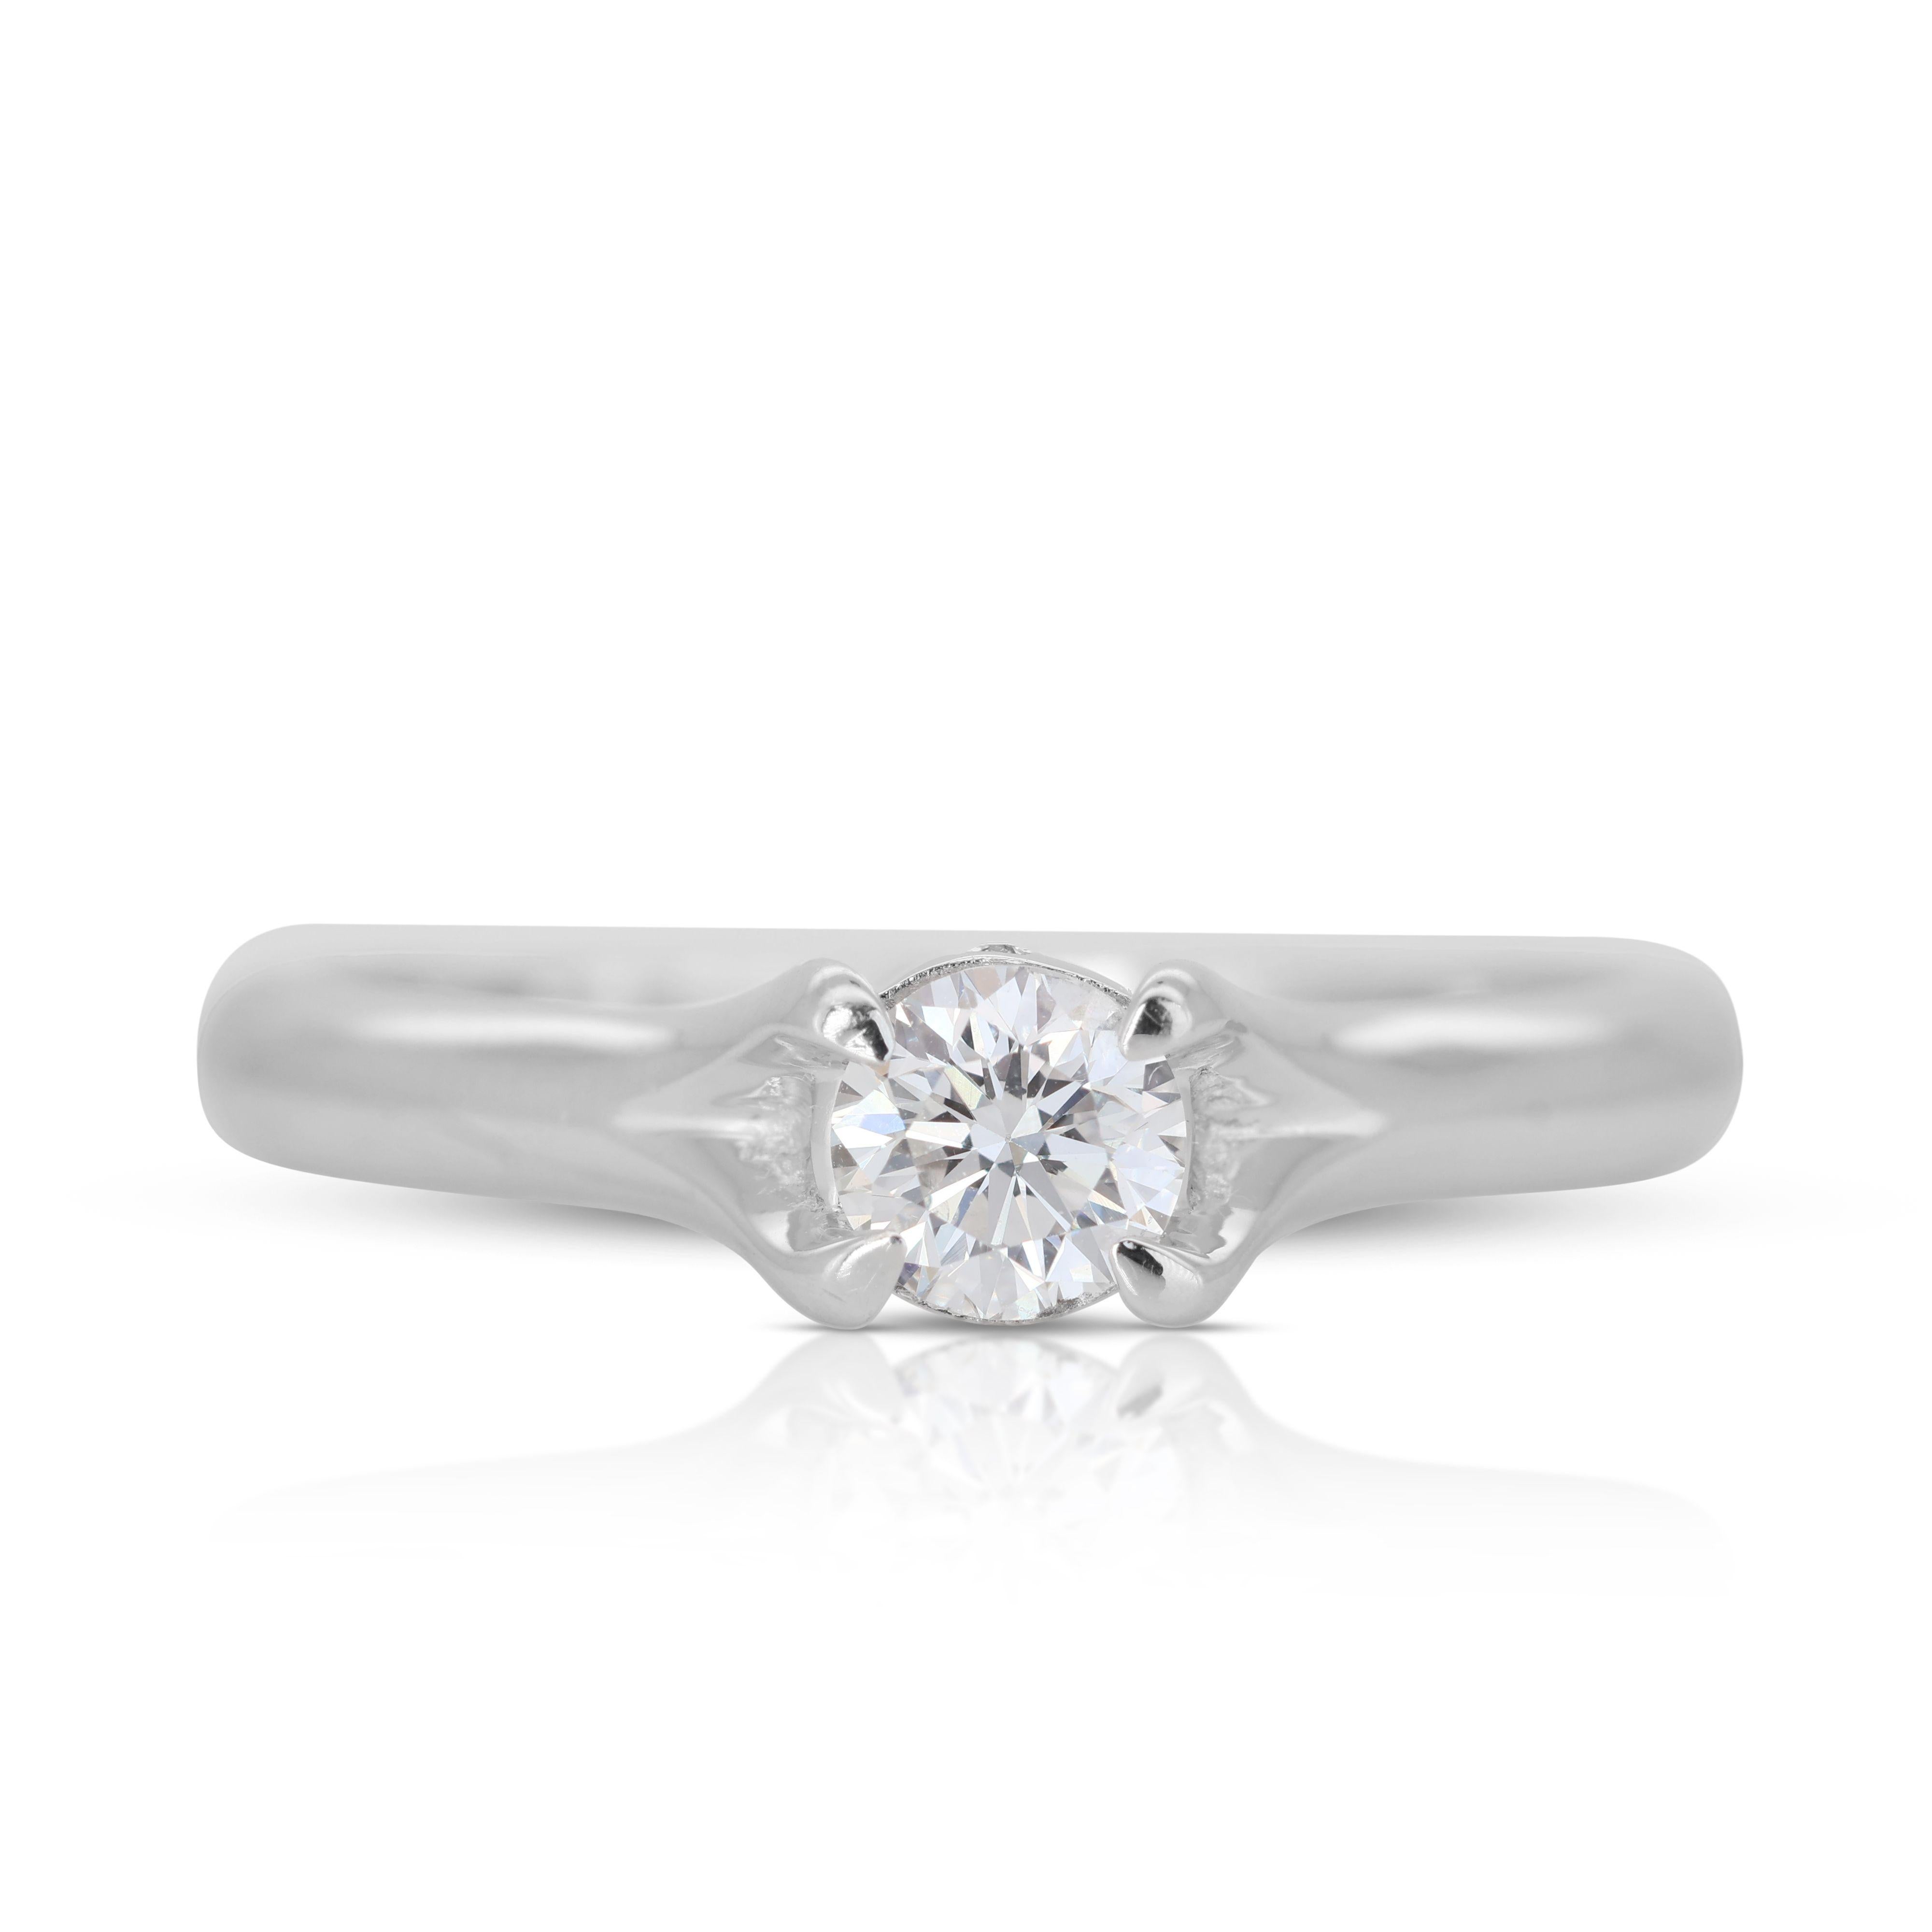 Taille ronde Classic 14K White Gold Solitaire Ring with 0.35ct Natural DiamondsDianoche Pte L en vente